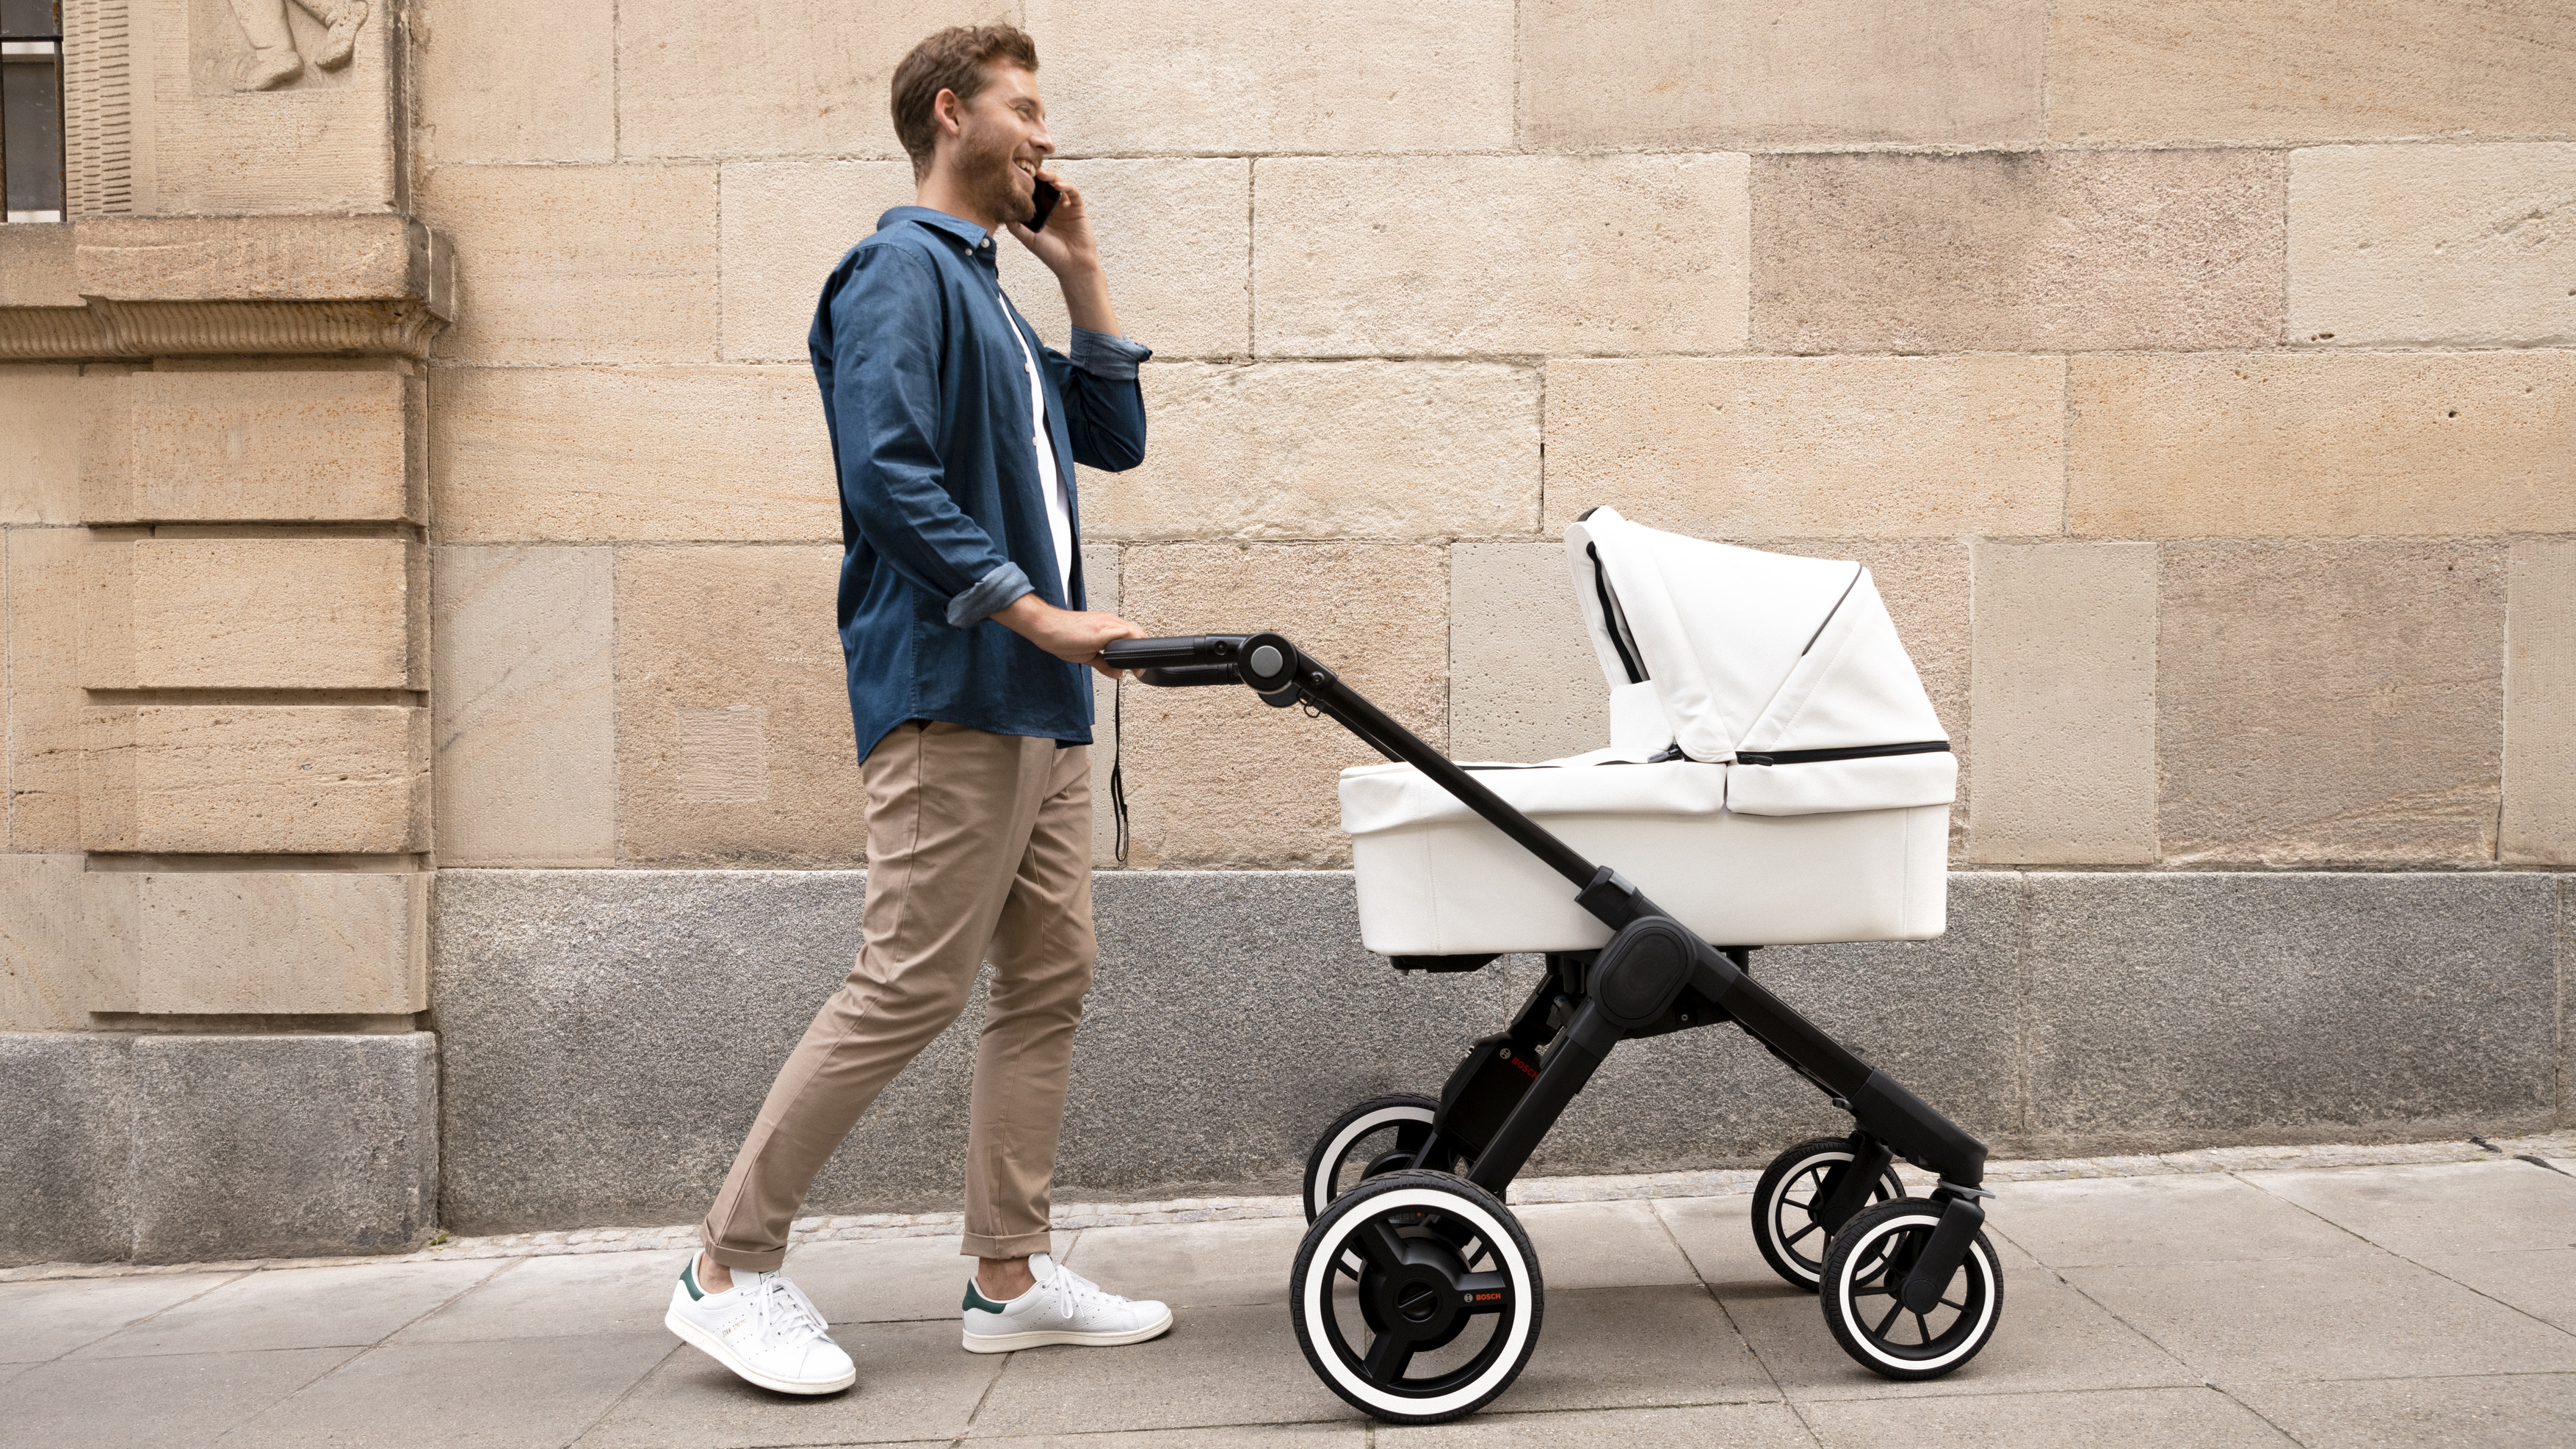 From the wind tunnel to the sidewalk: Bosch is bringing smart electrical drives to strollers